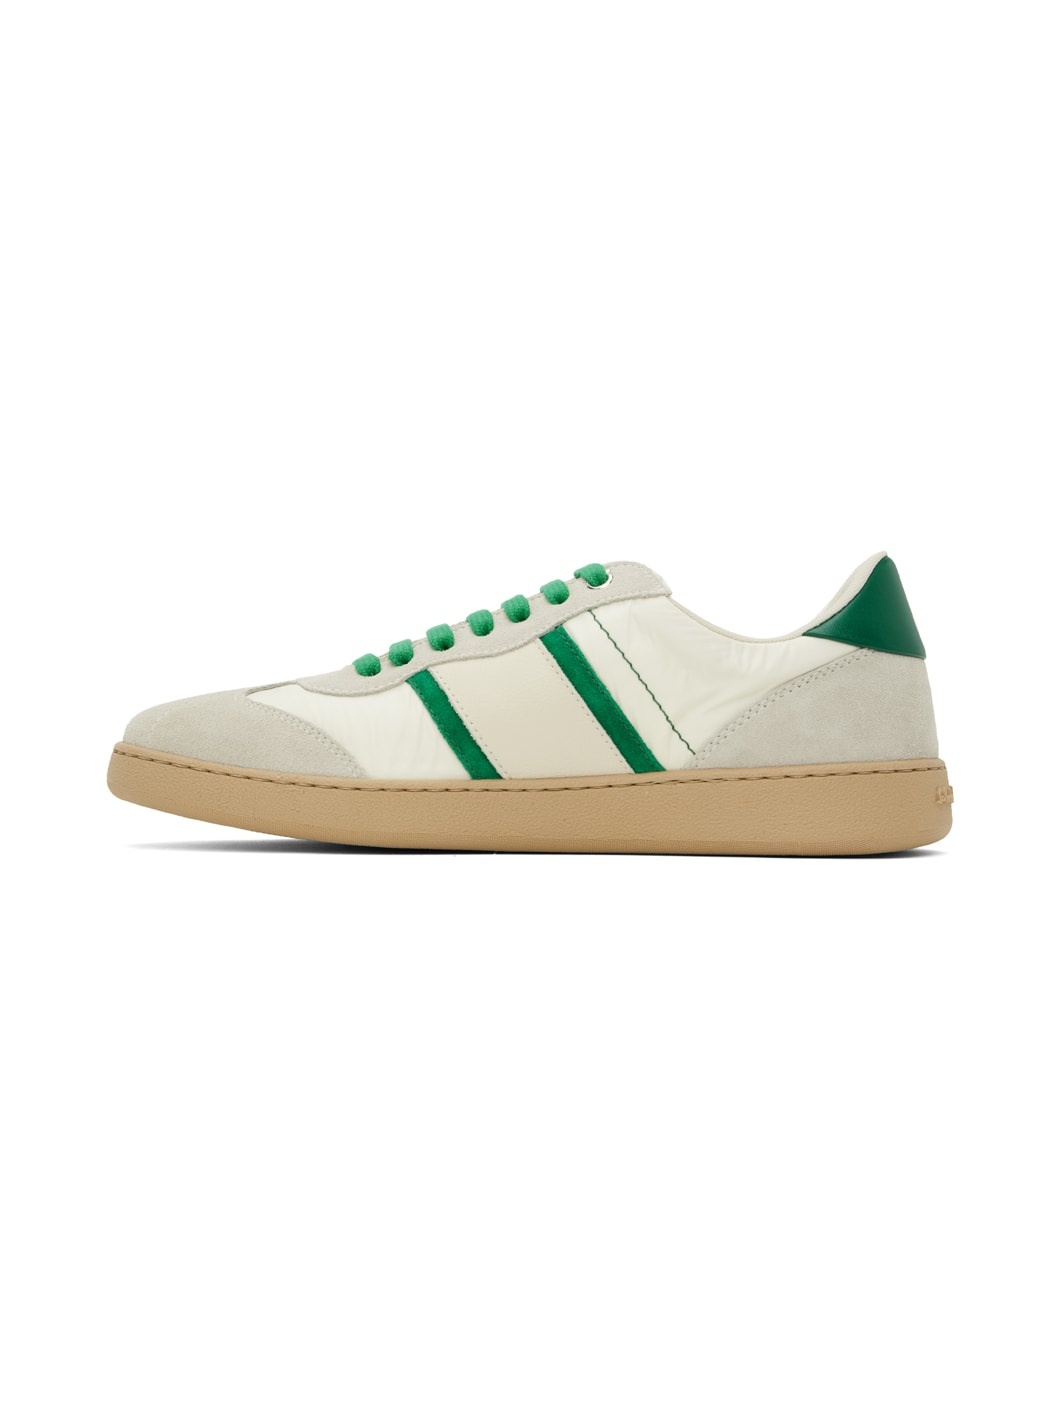 Off-White & Green Signature Low Sneakers - 3